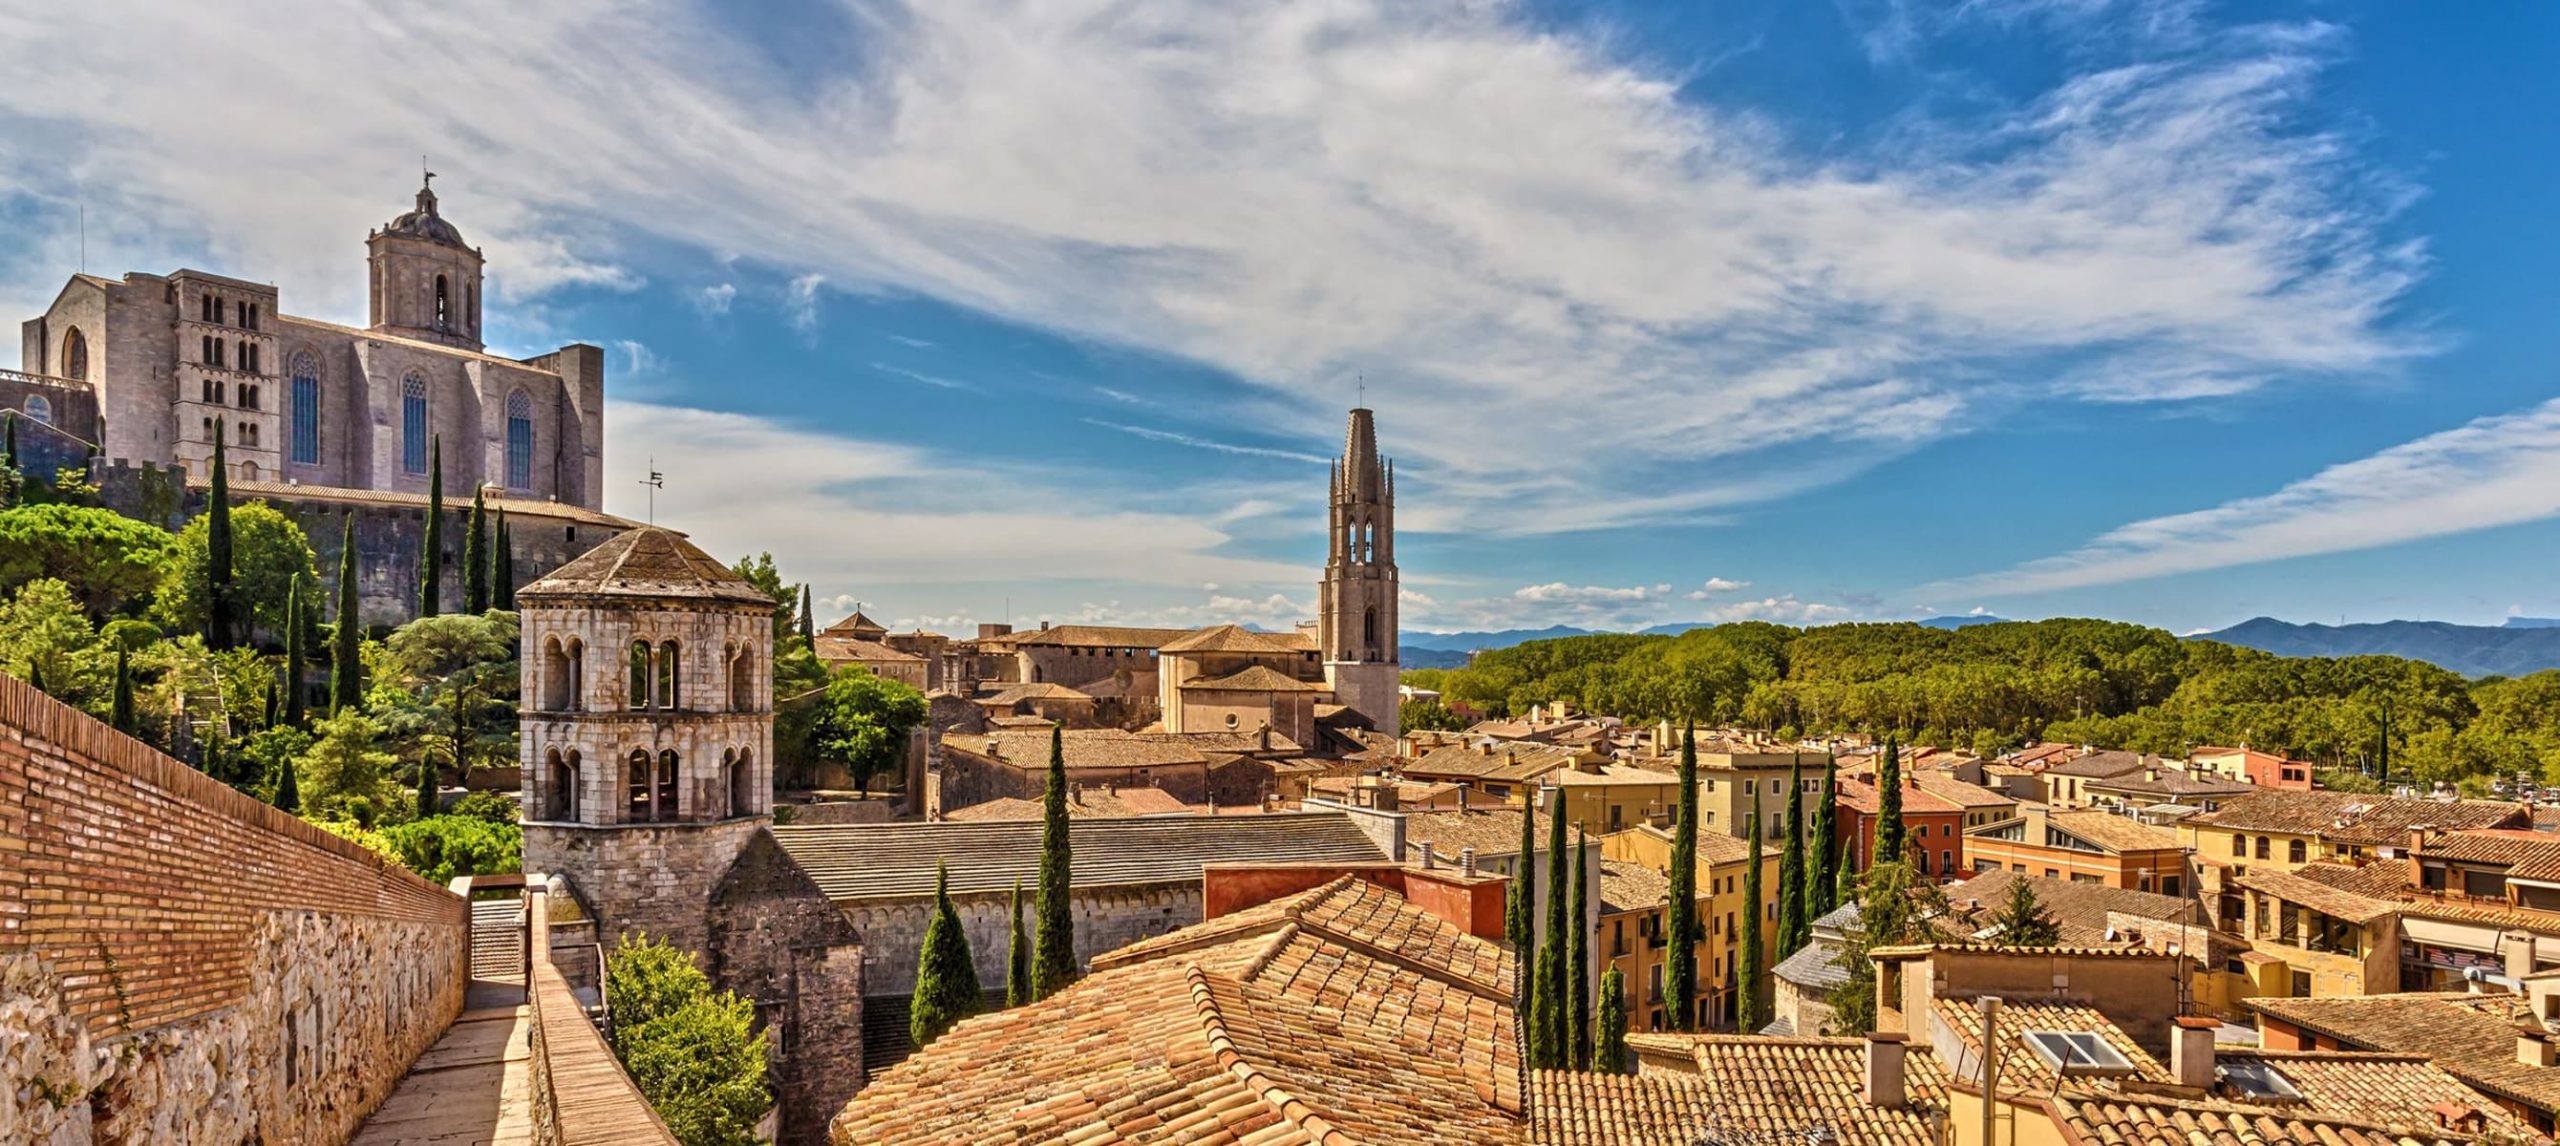 12 Amazing Day Trips From Barcelona, Spain